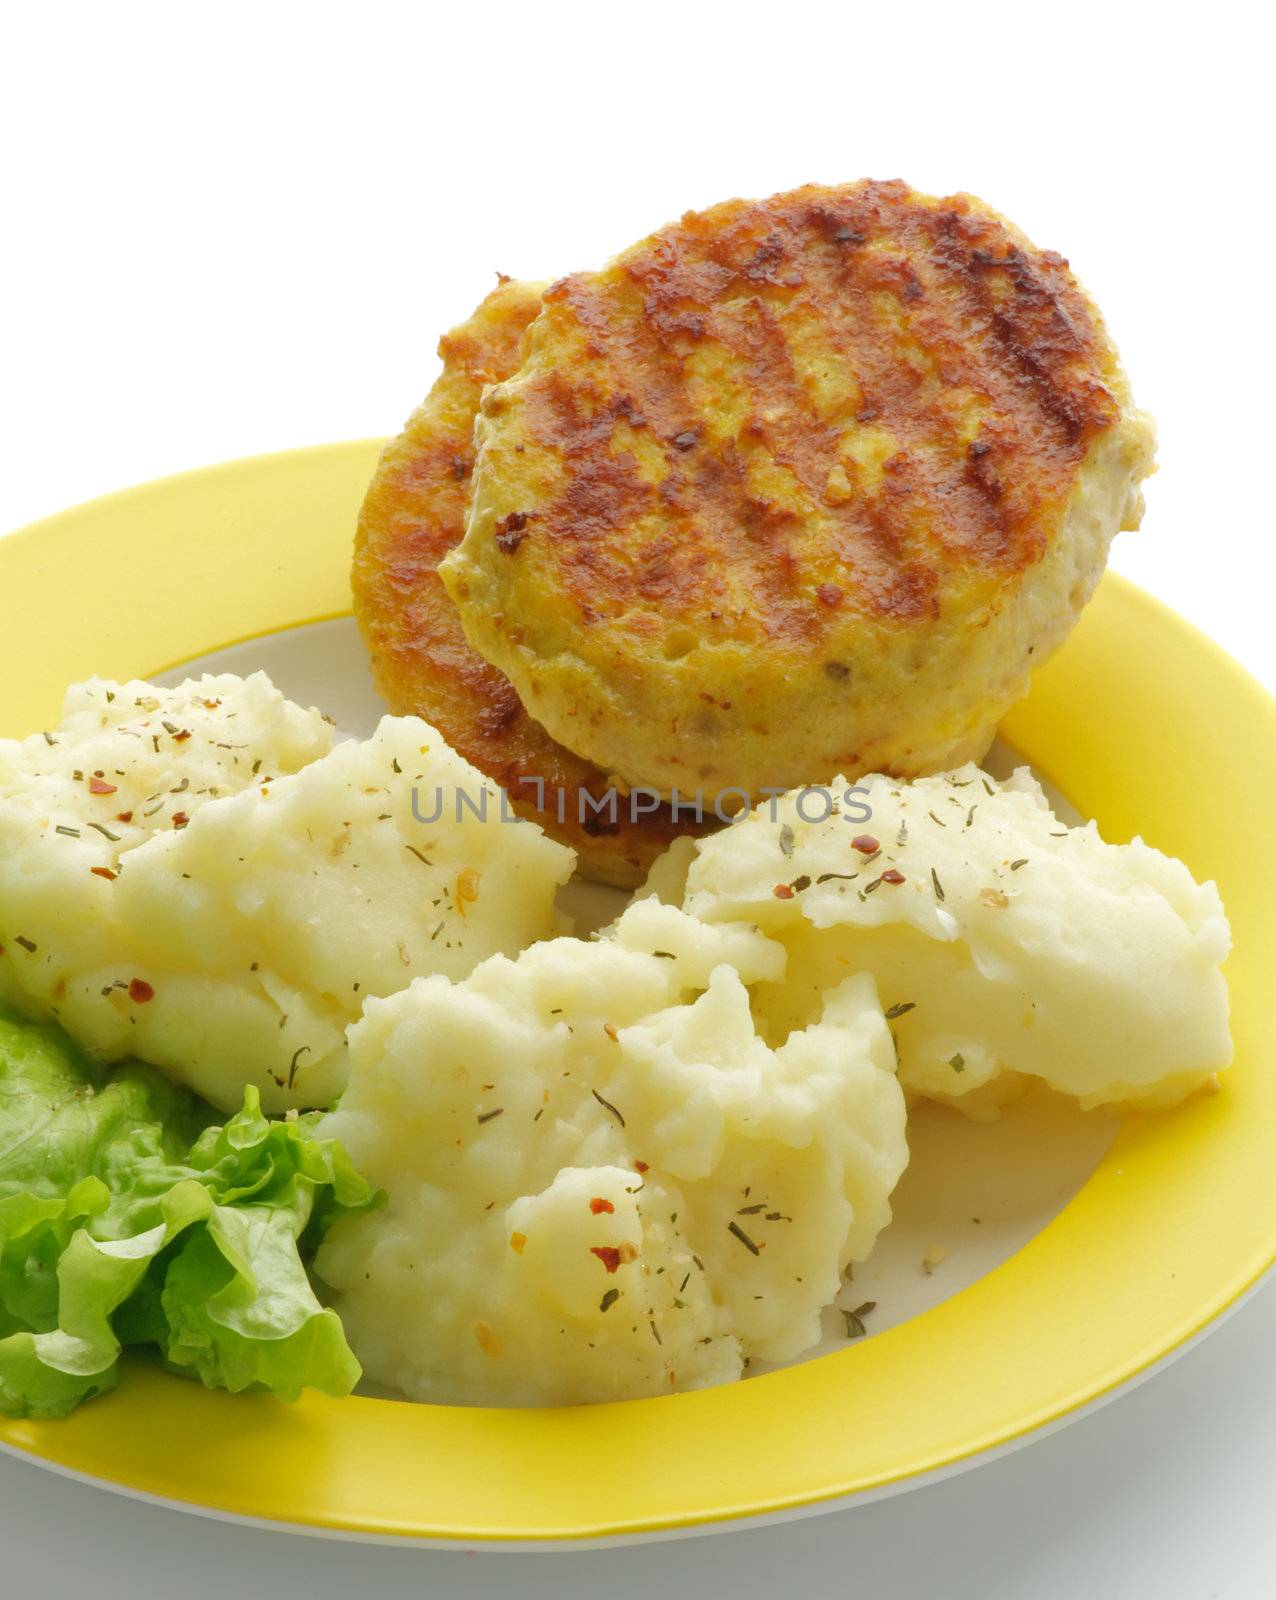 Mashed Potato and Meat Cutlets with Lettuce on Yellow Plate closeup